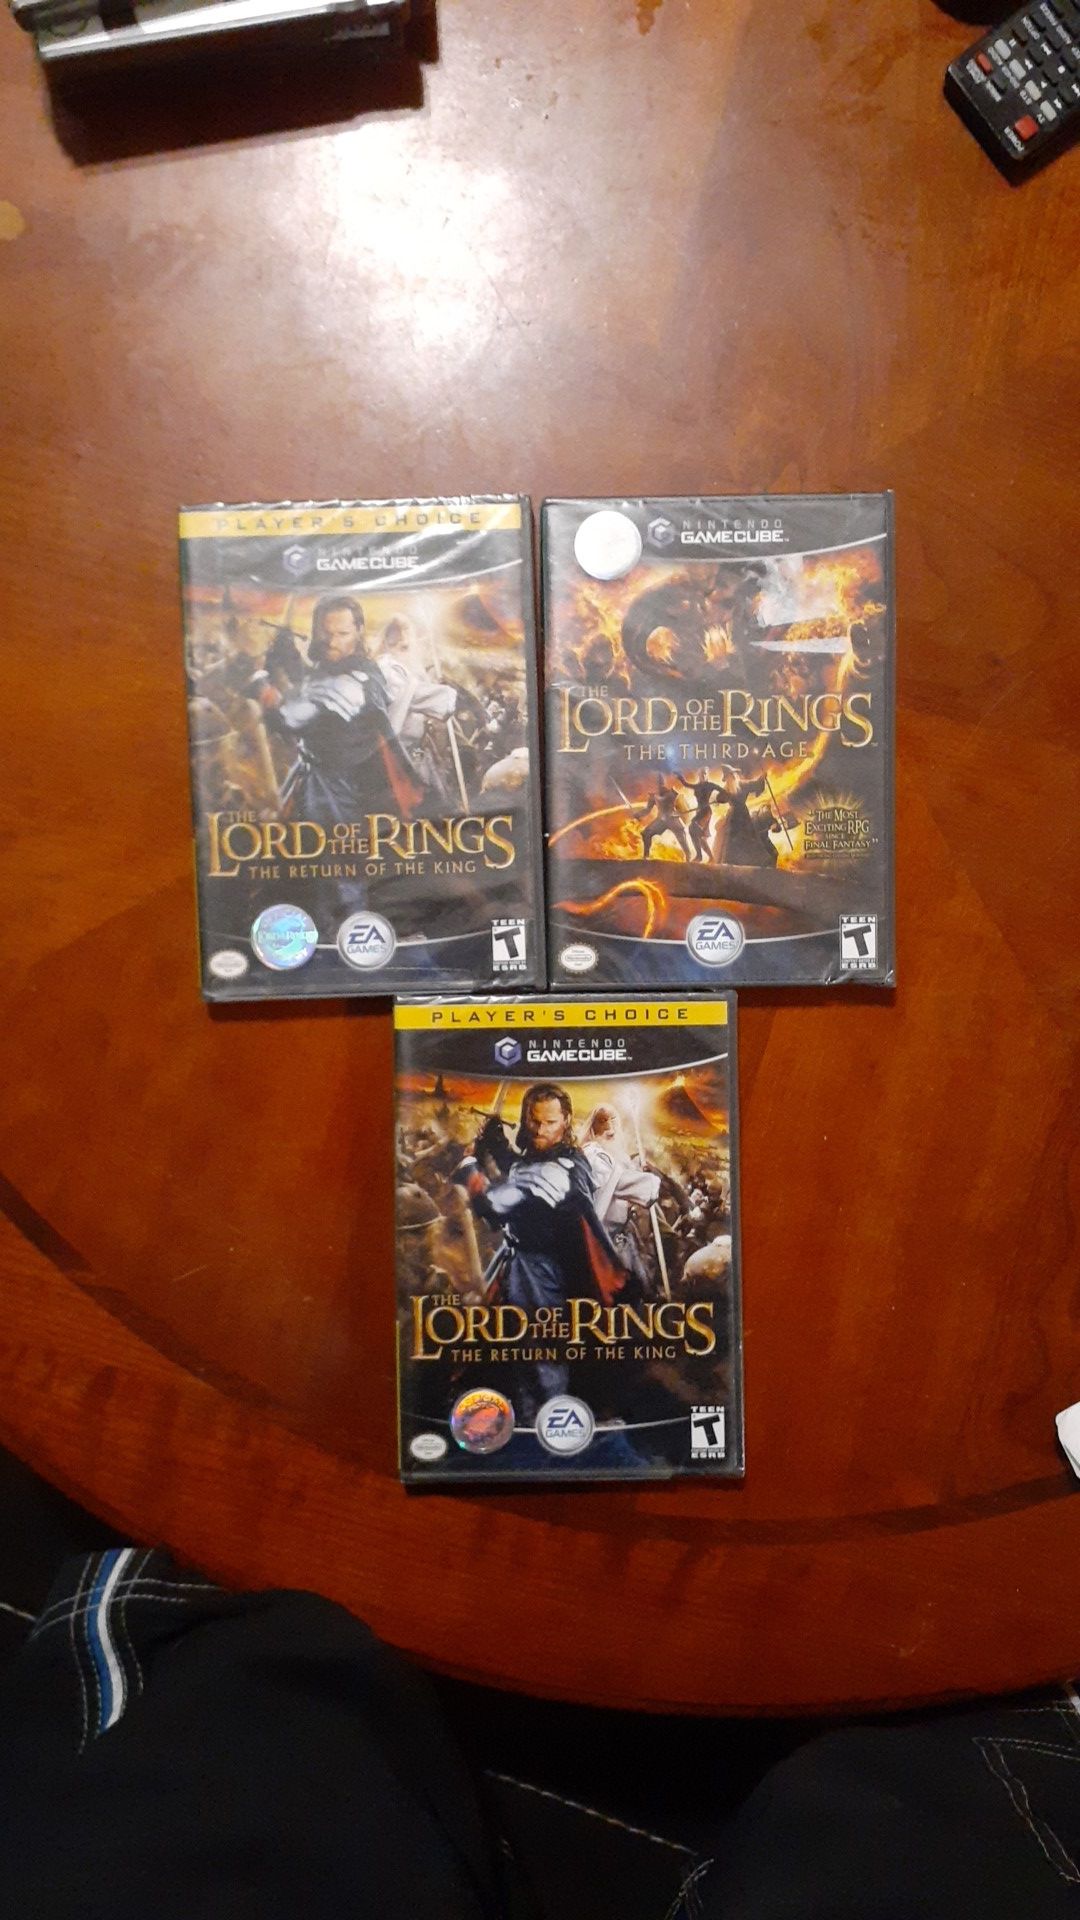 Nintendo gamecube, The lord of the rings, new games.